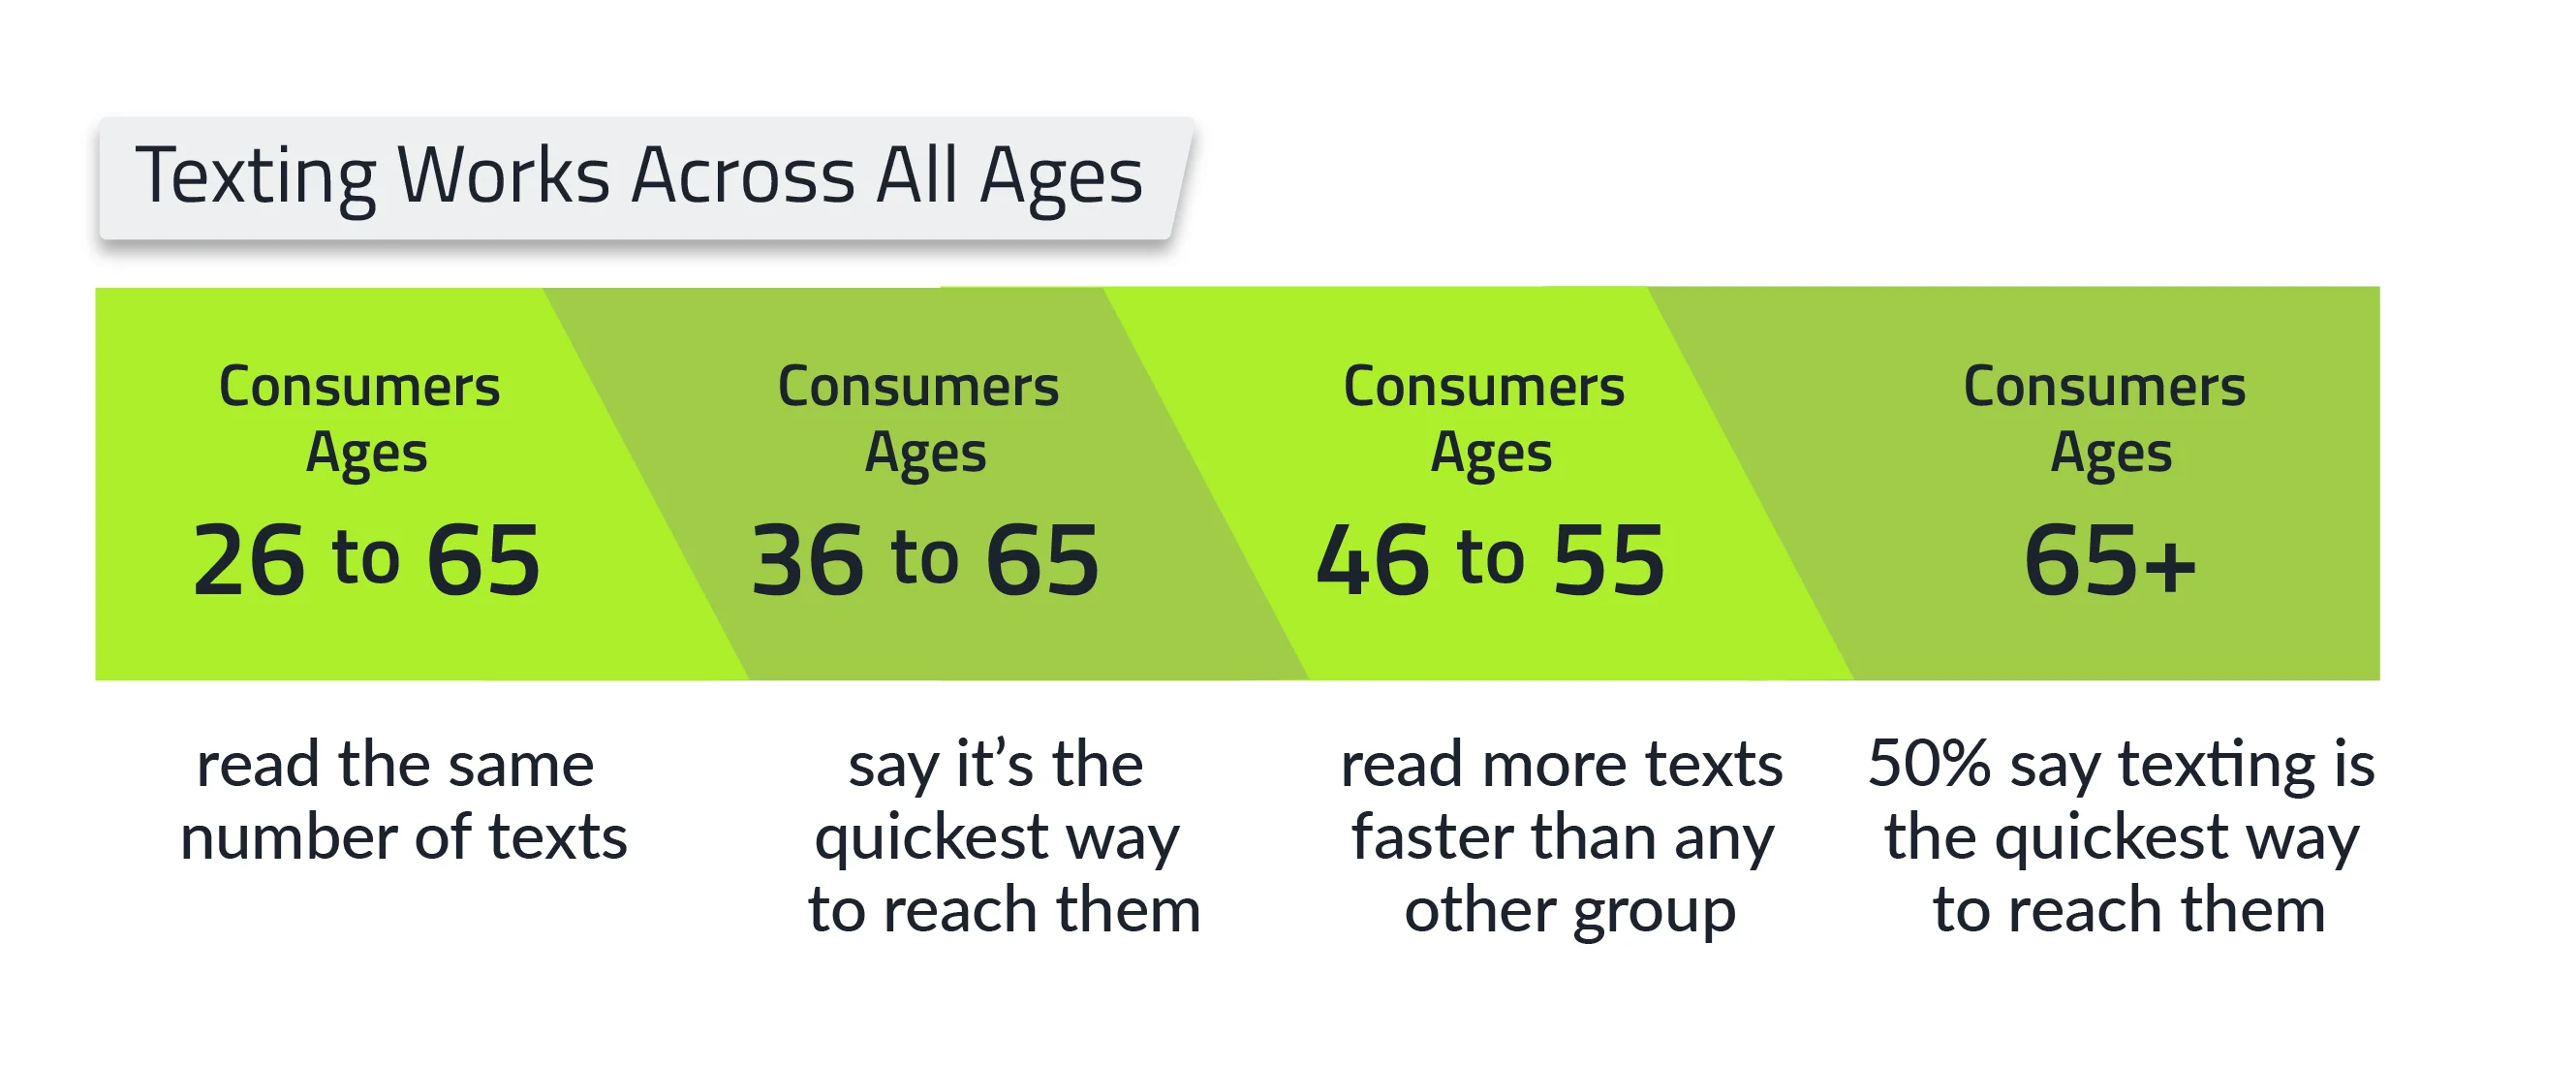 text-messaging-work-across-all-generations